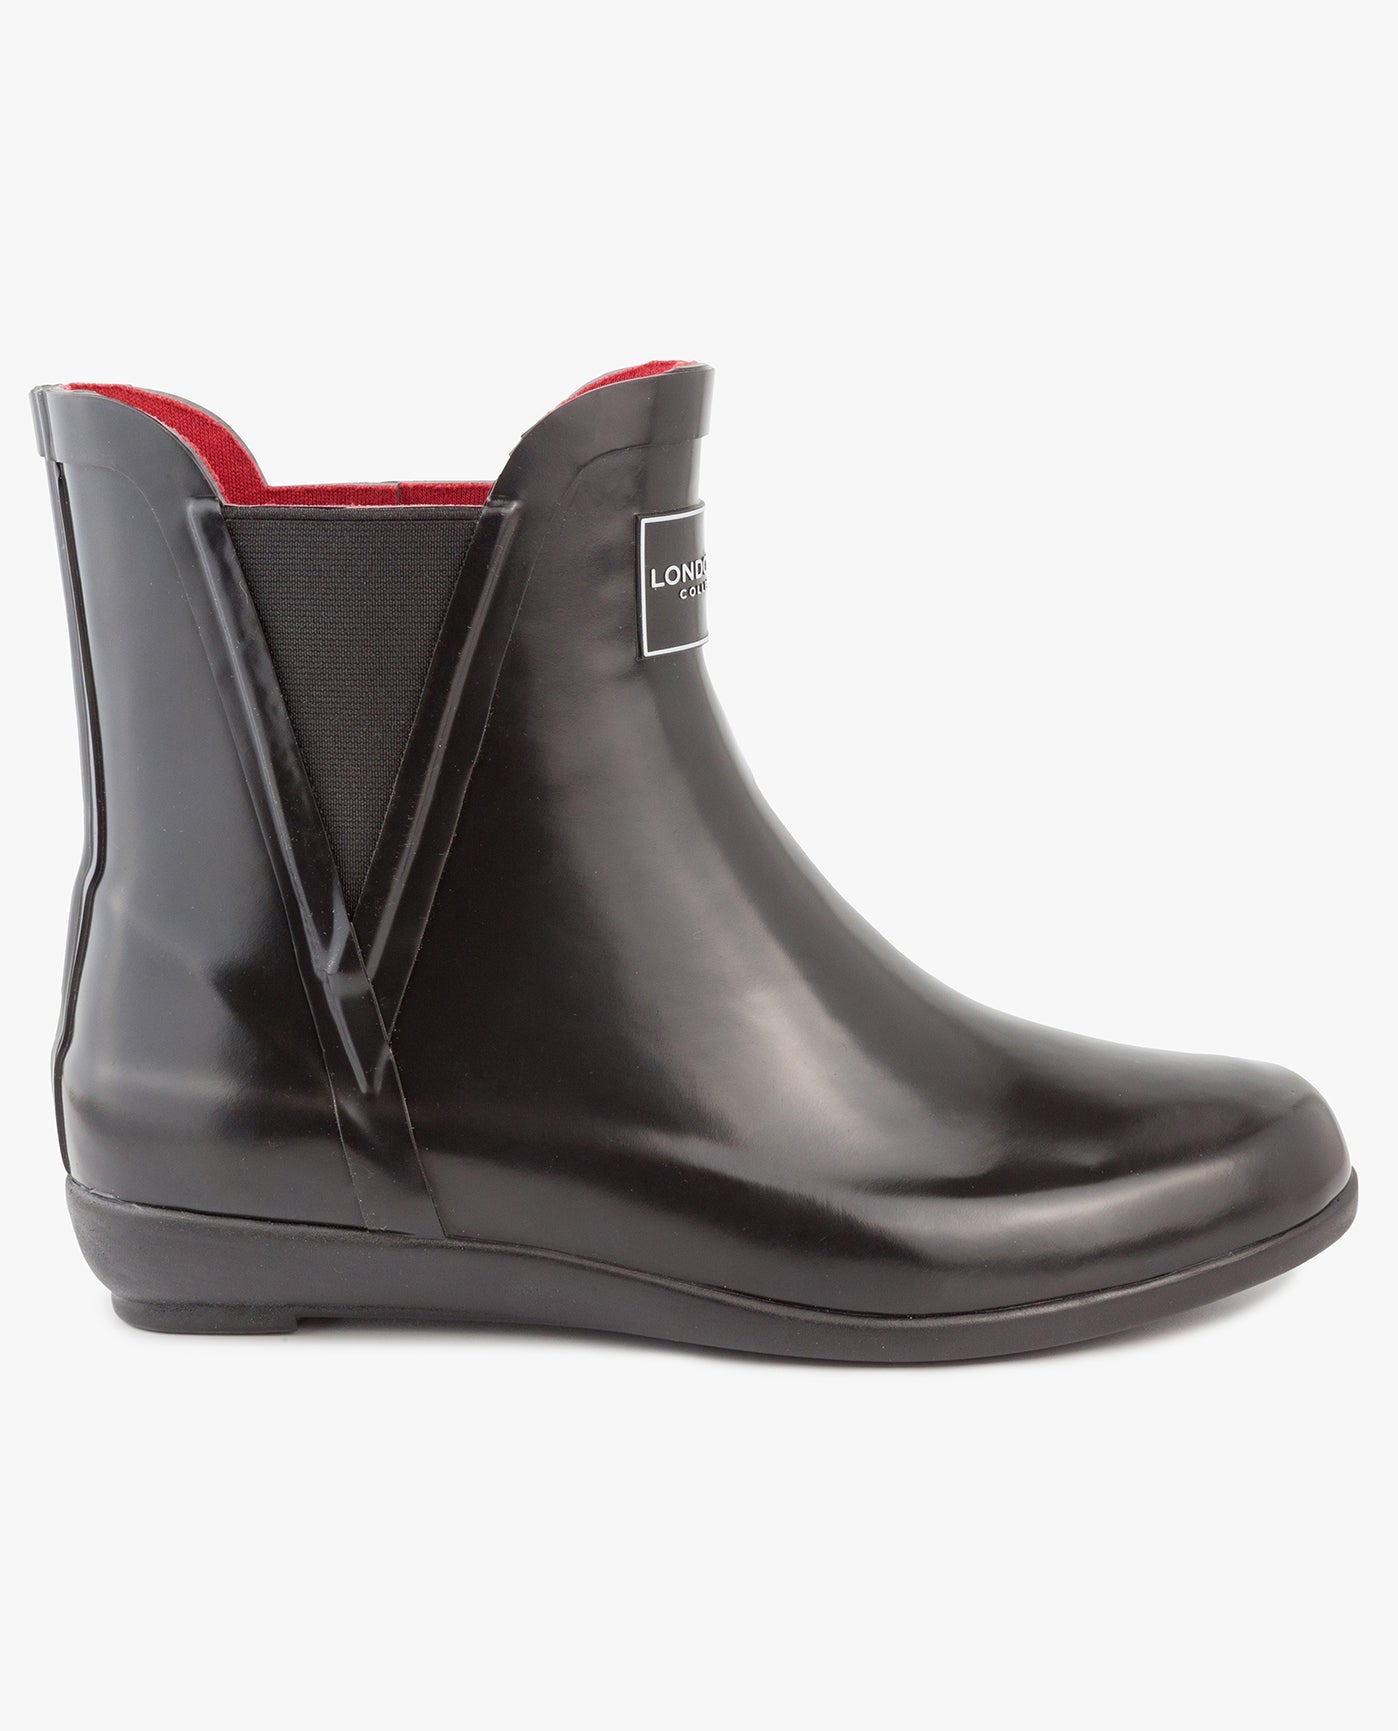 OTHER SIDE VIEW  OF WOMENS PICCADILLY ANKLE RAINBOOT | ESO_BLACK SHINY_012